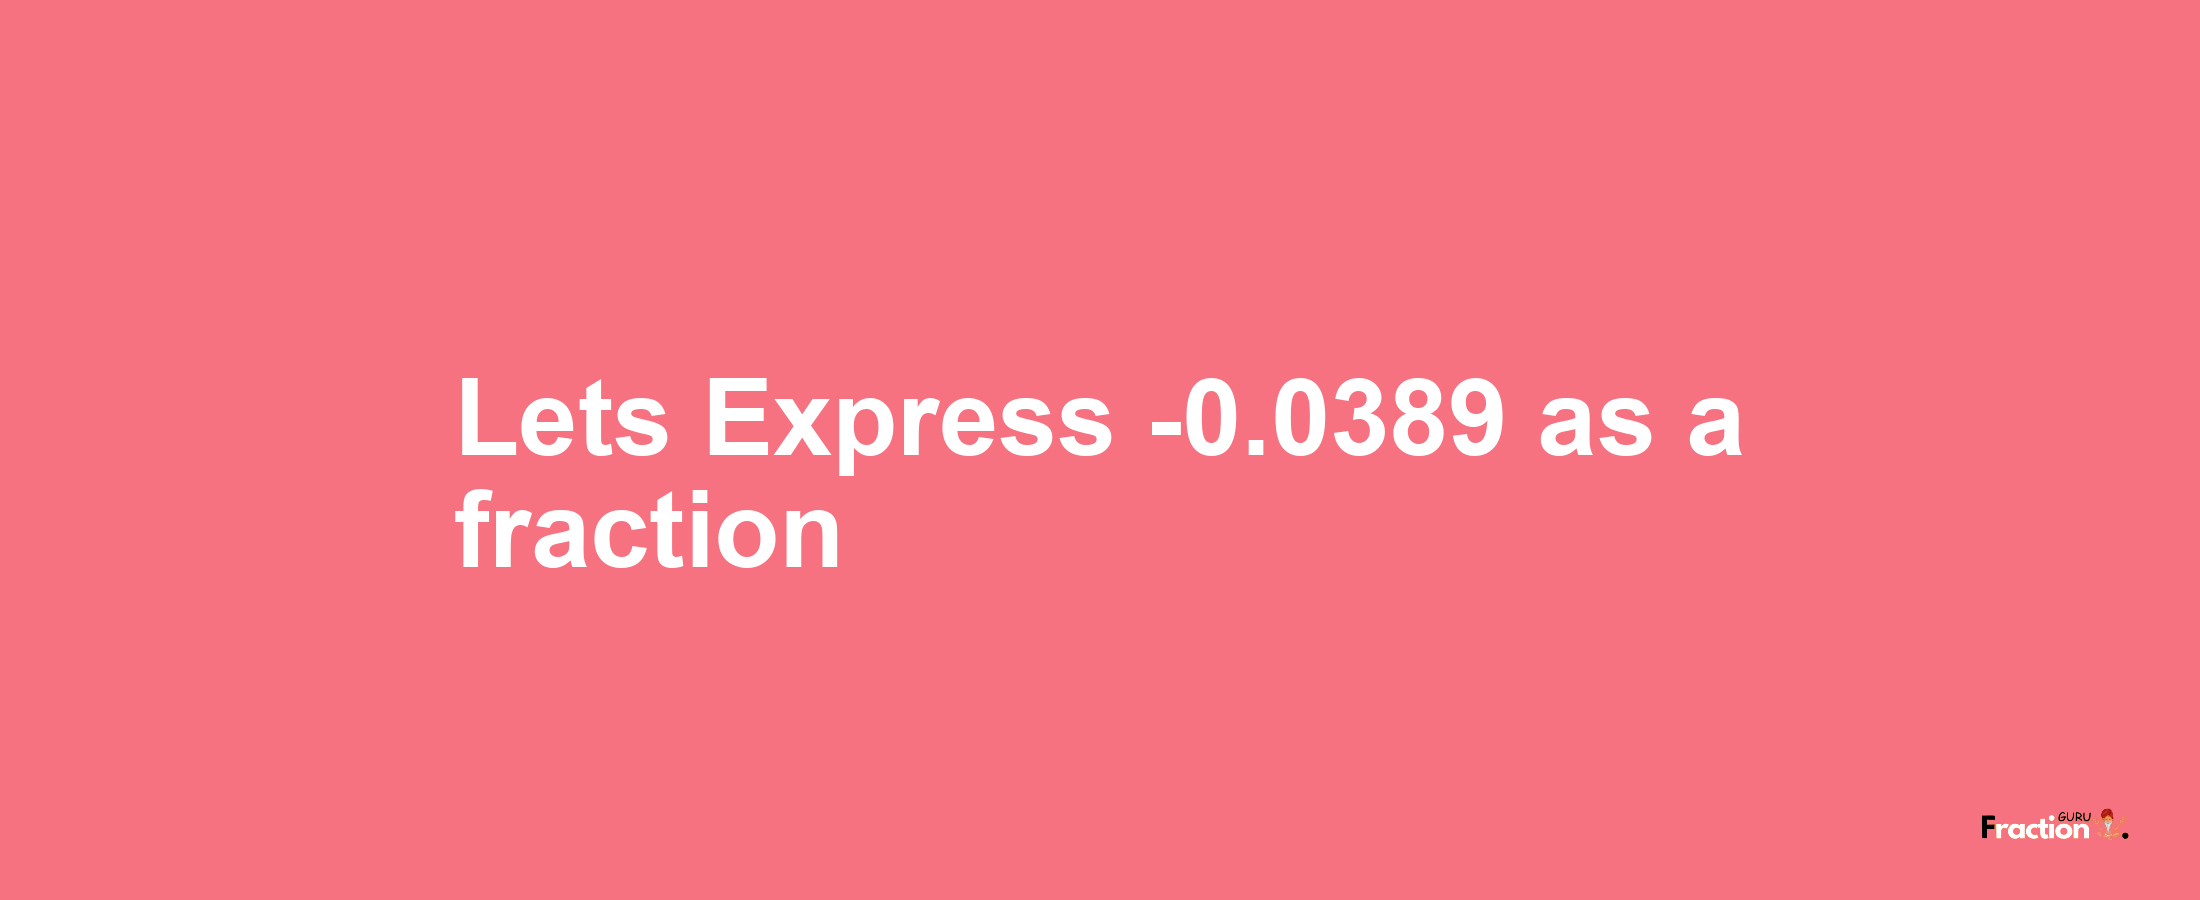 Lets Express -0.0389 as afraction